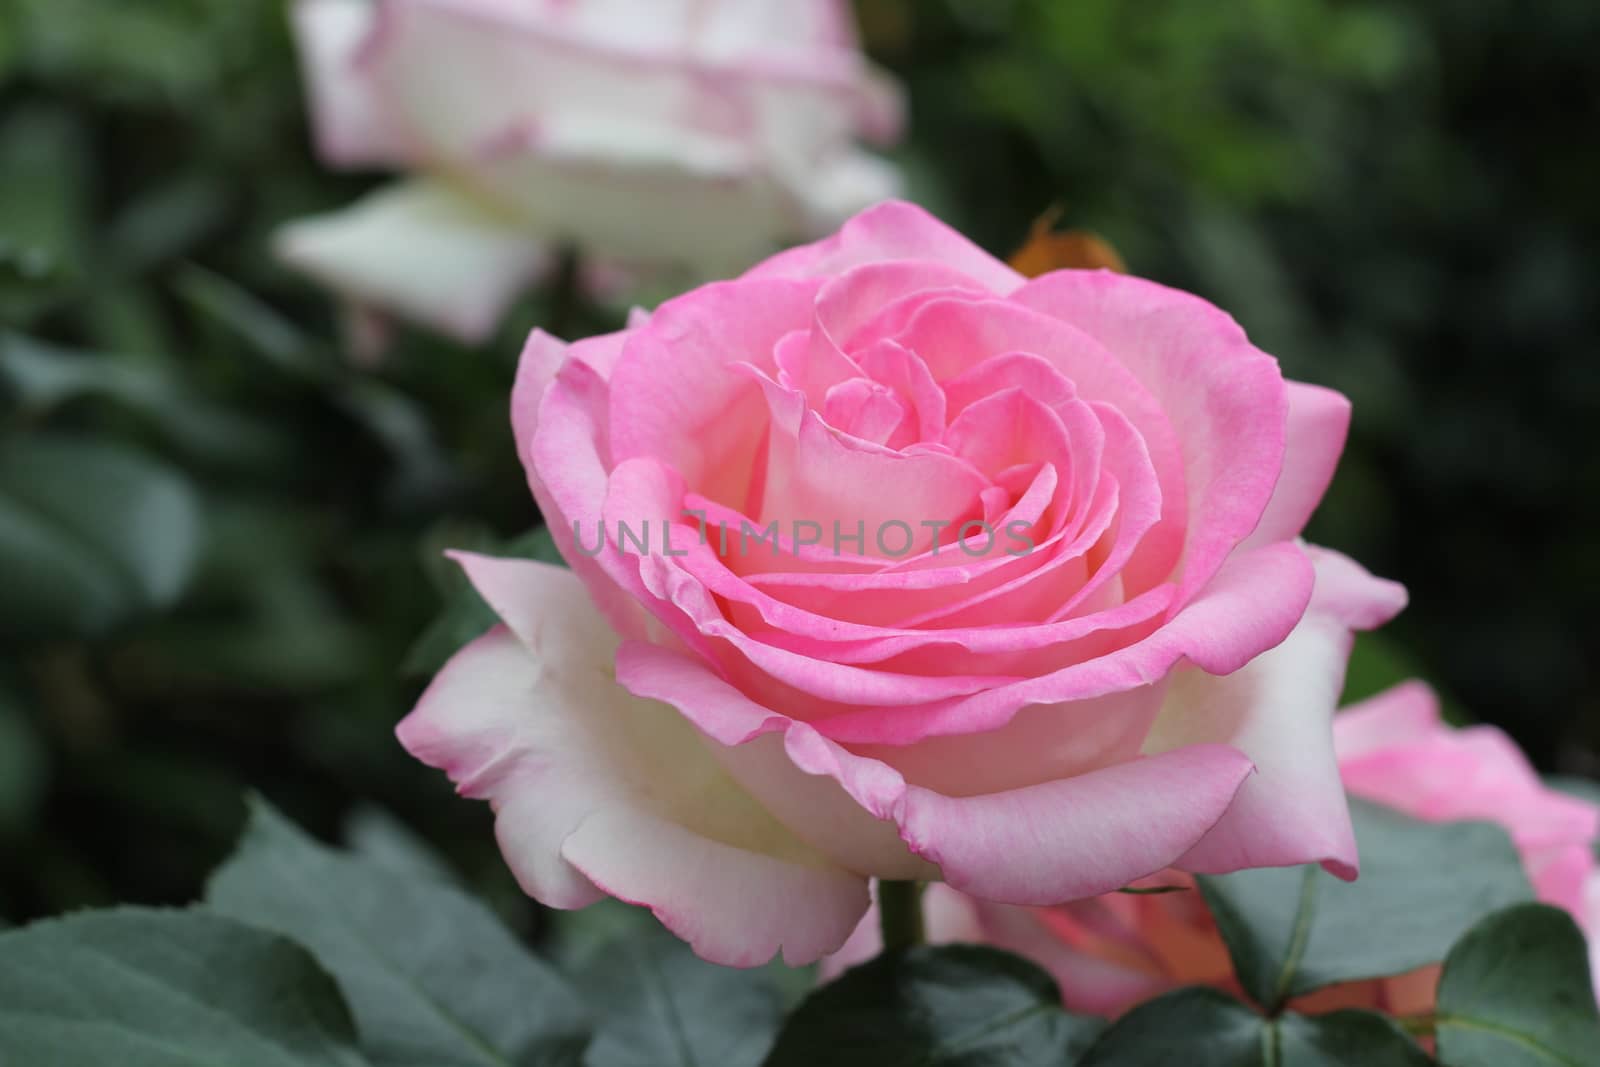 A beautifl pink rose, with lot of petales.